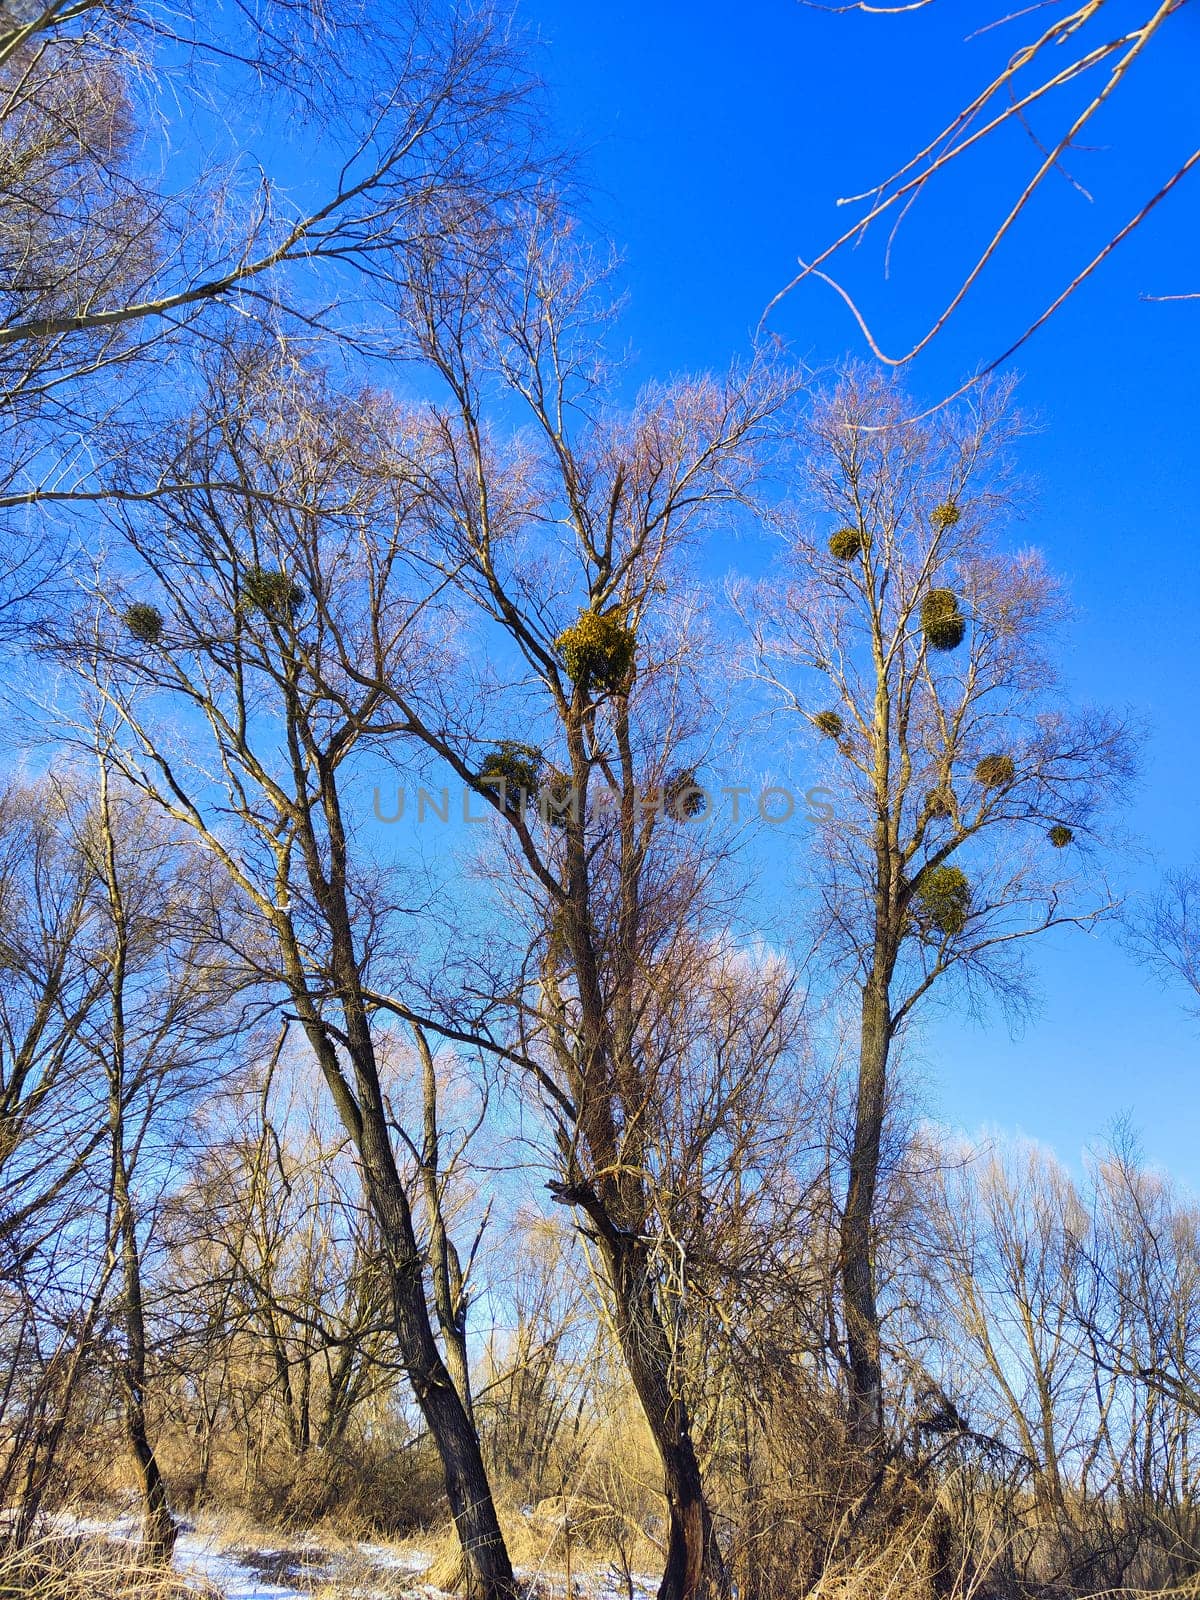 Thickets trees with mistletoe parasite on the branches by koksikoks